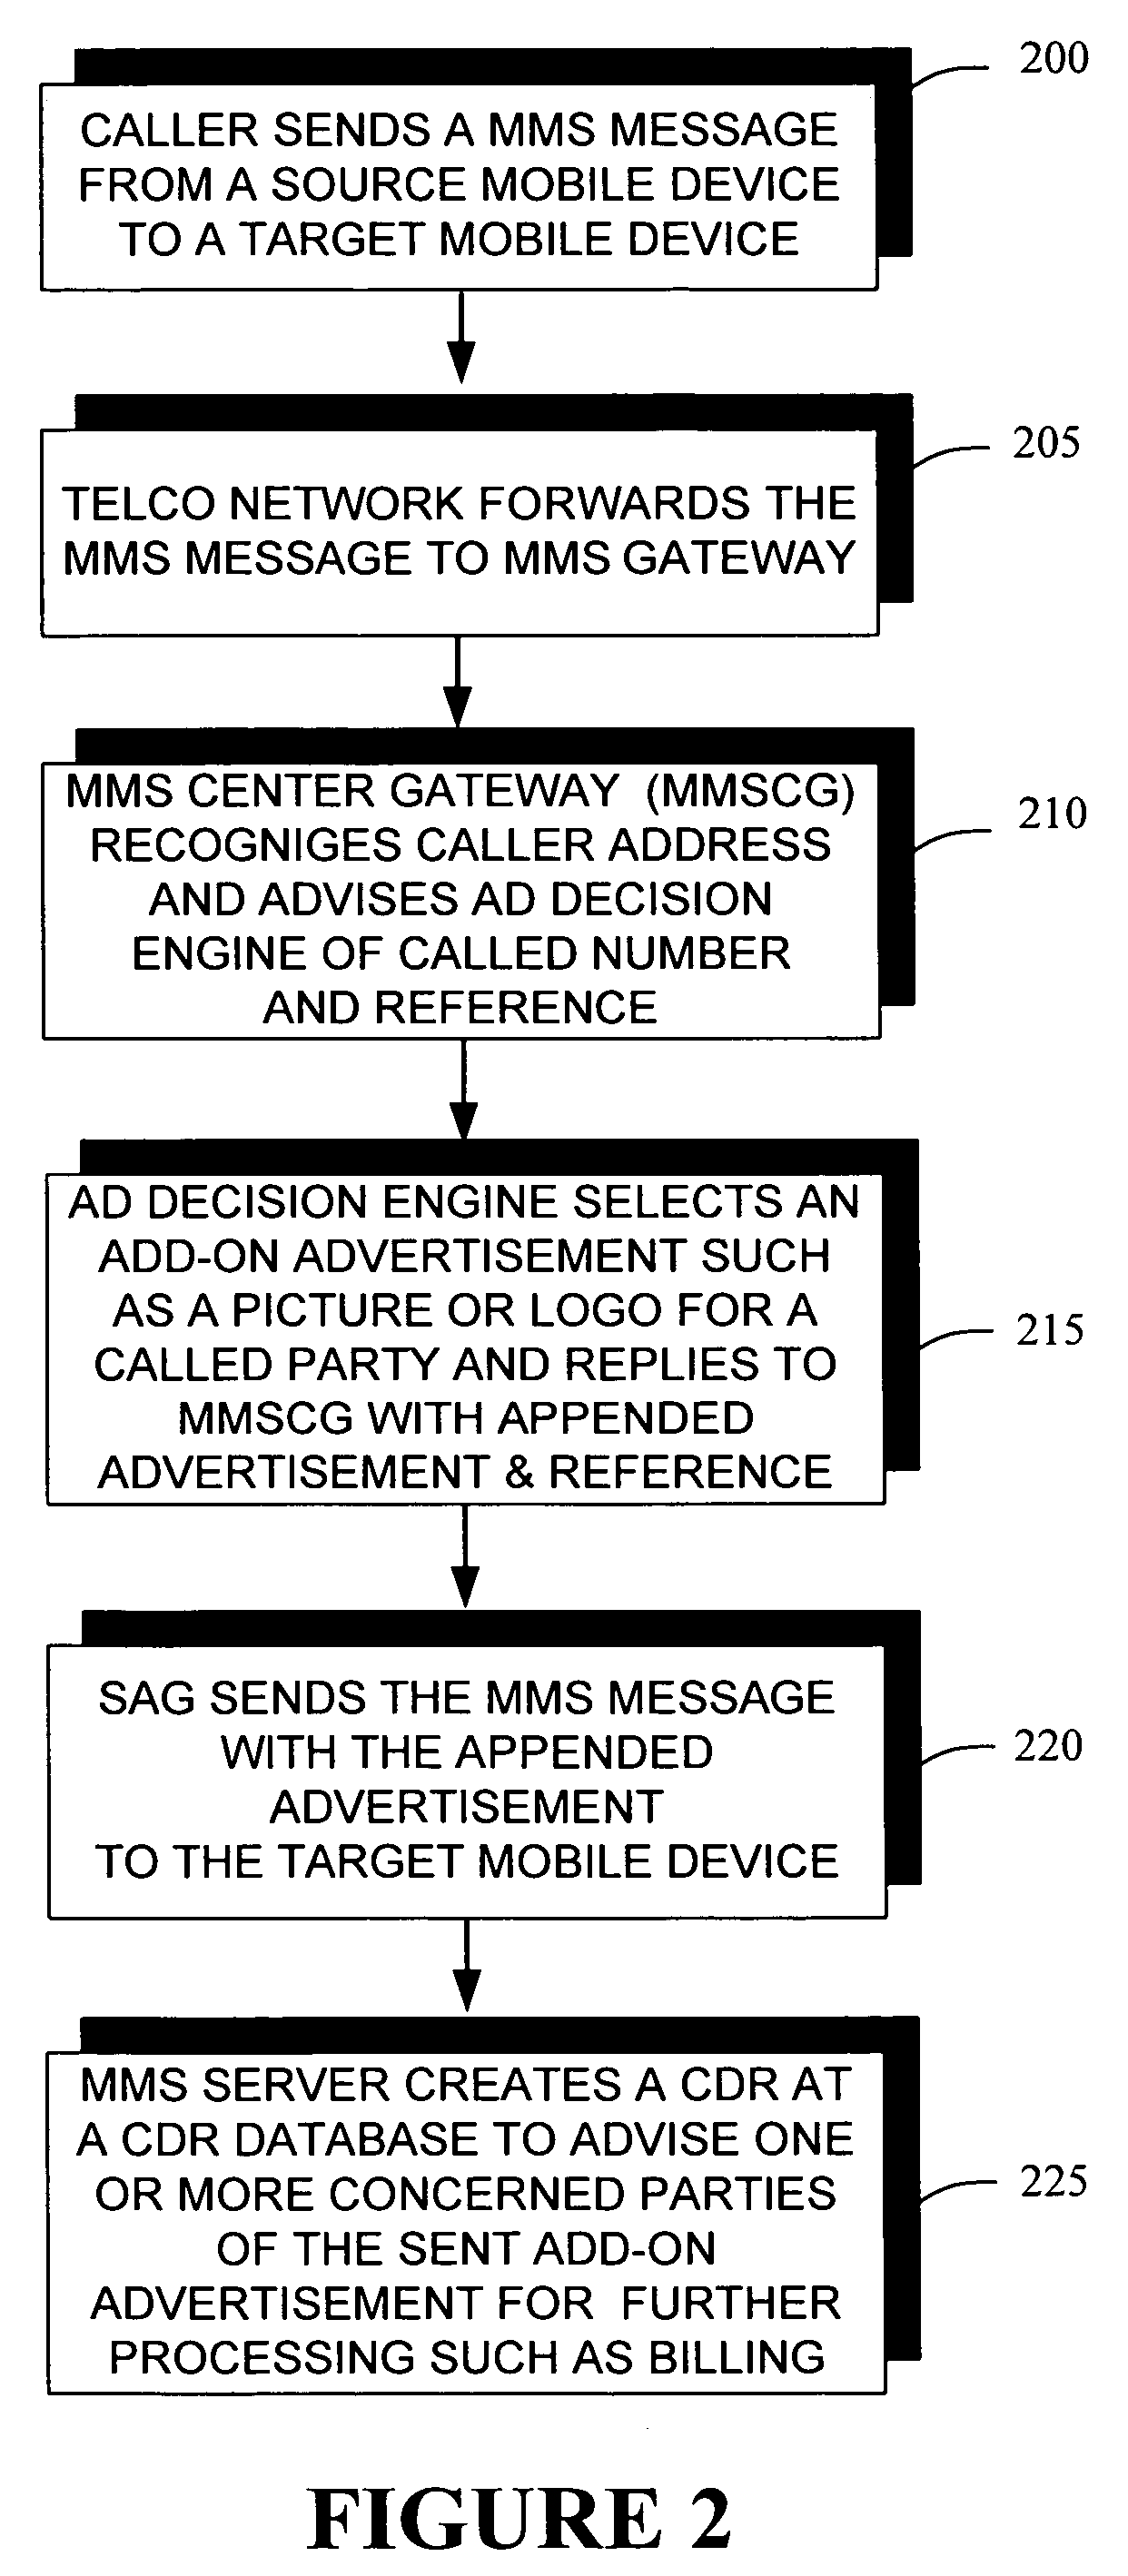 Providing a multimedia message with a multimedia messaging service message in a mobile environment